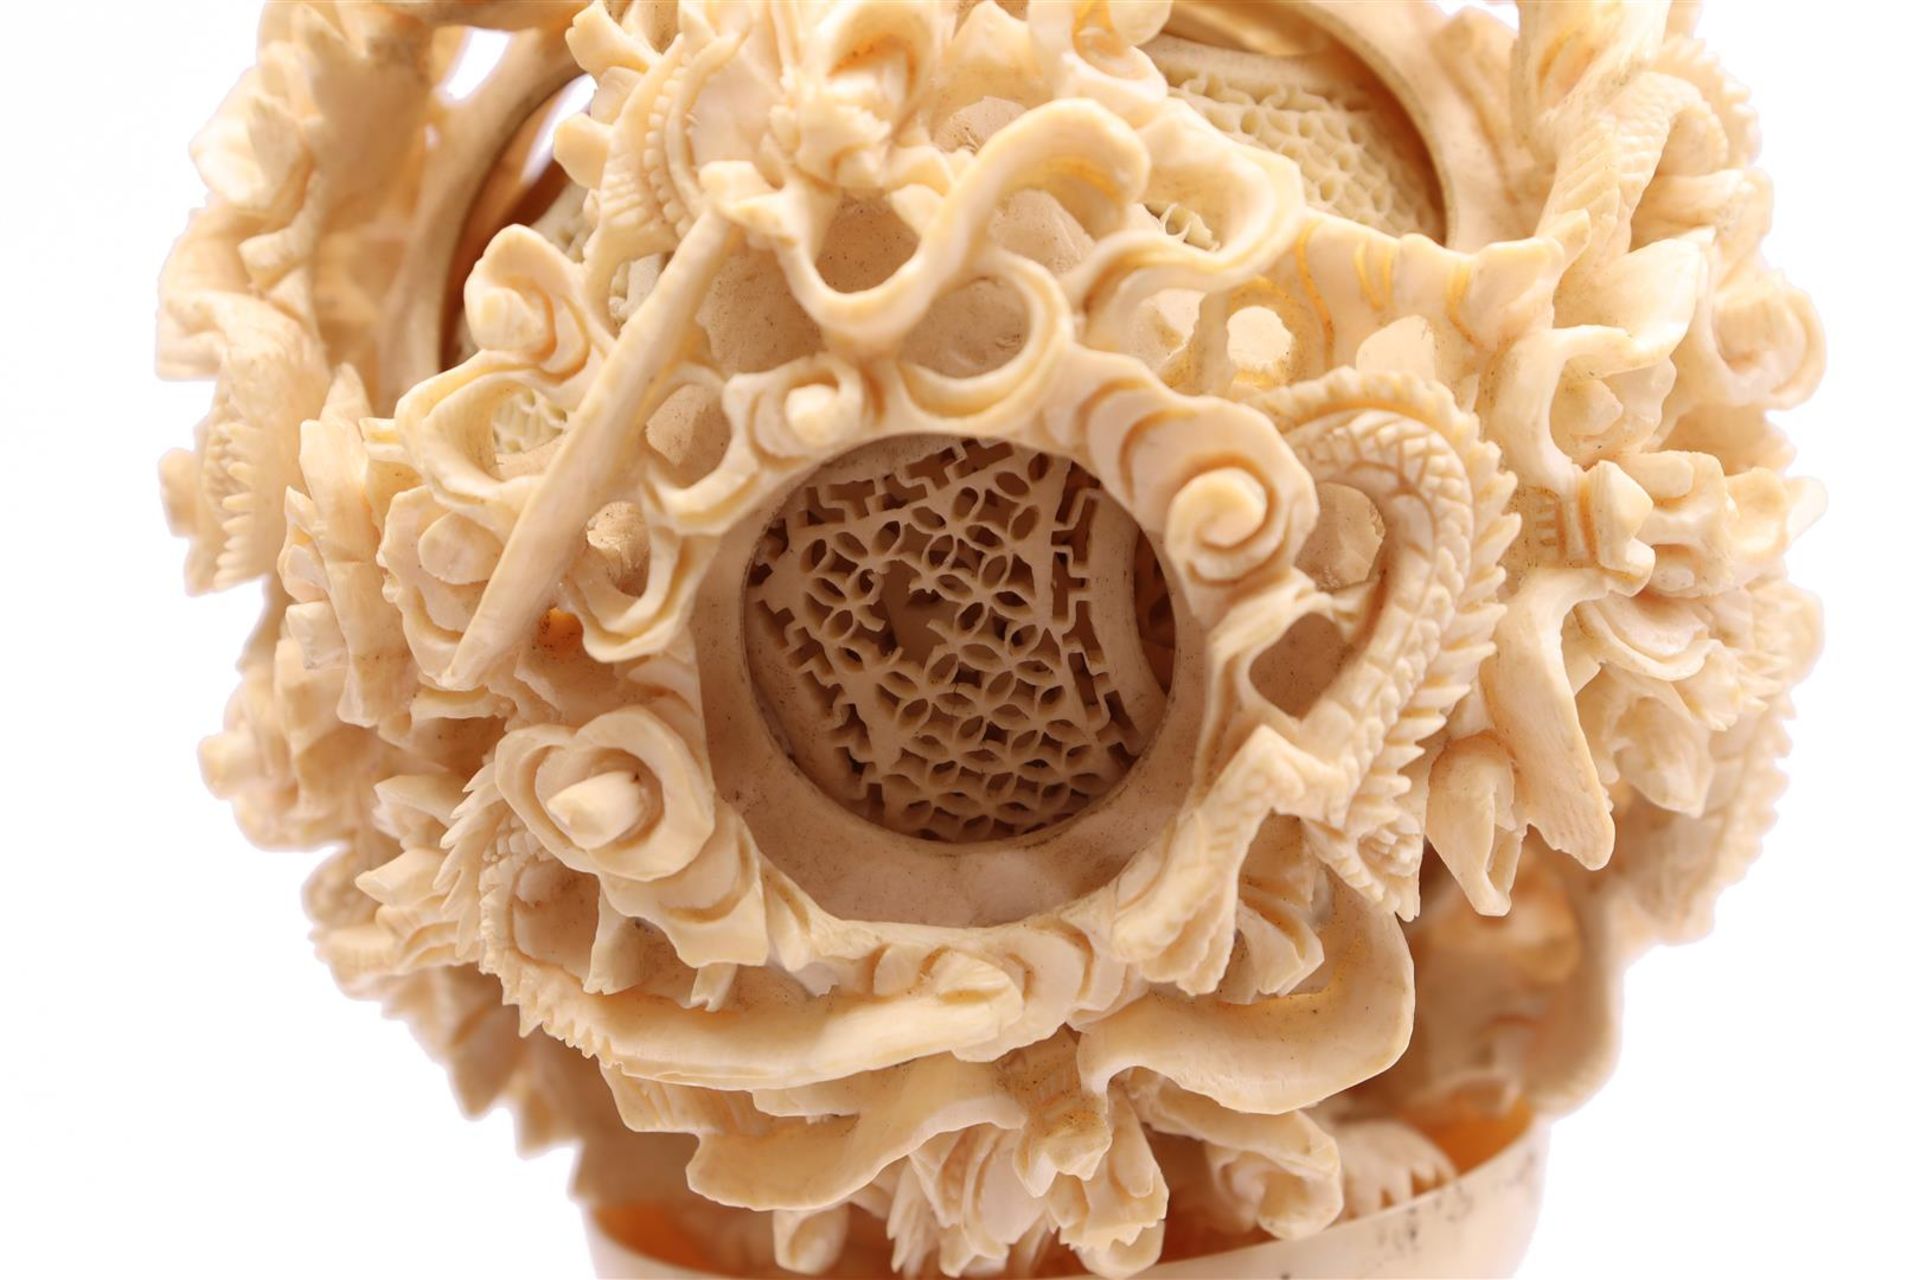 Richly carved ivory ball - Image 7 of 9